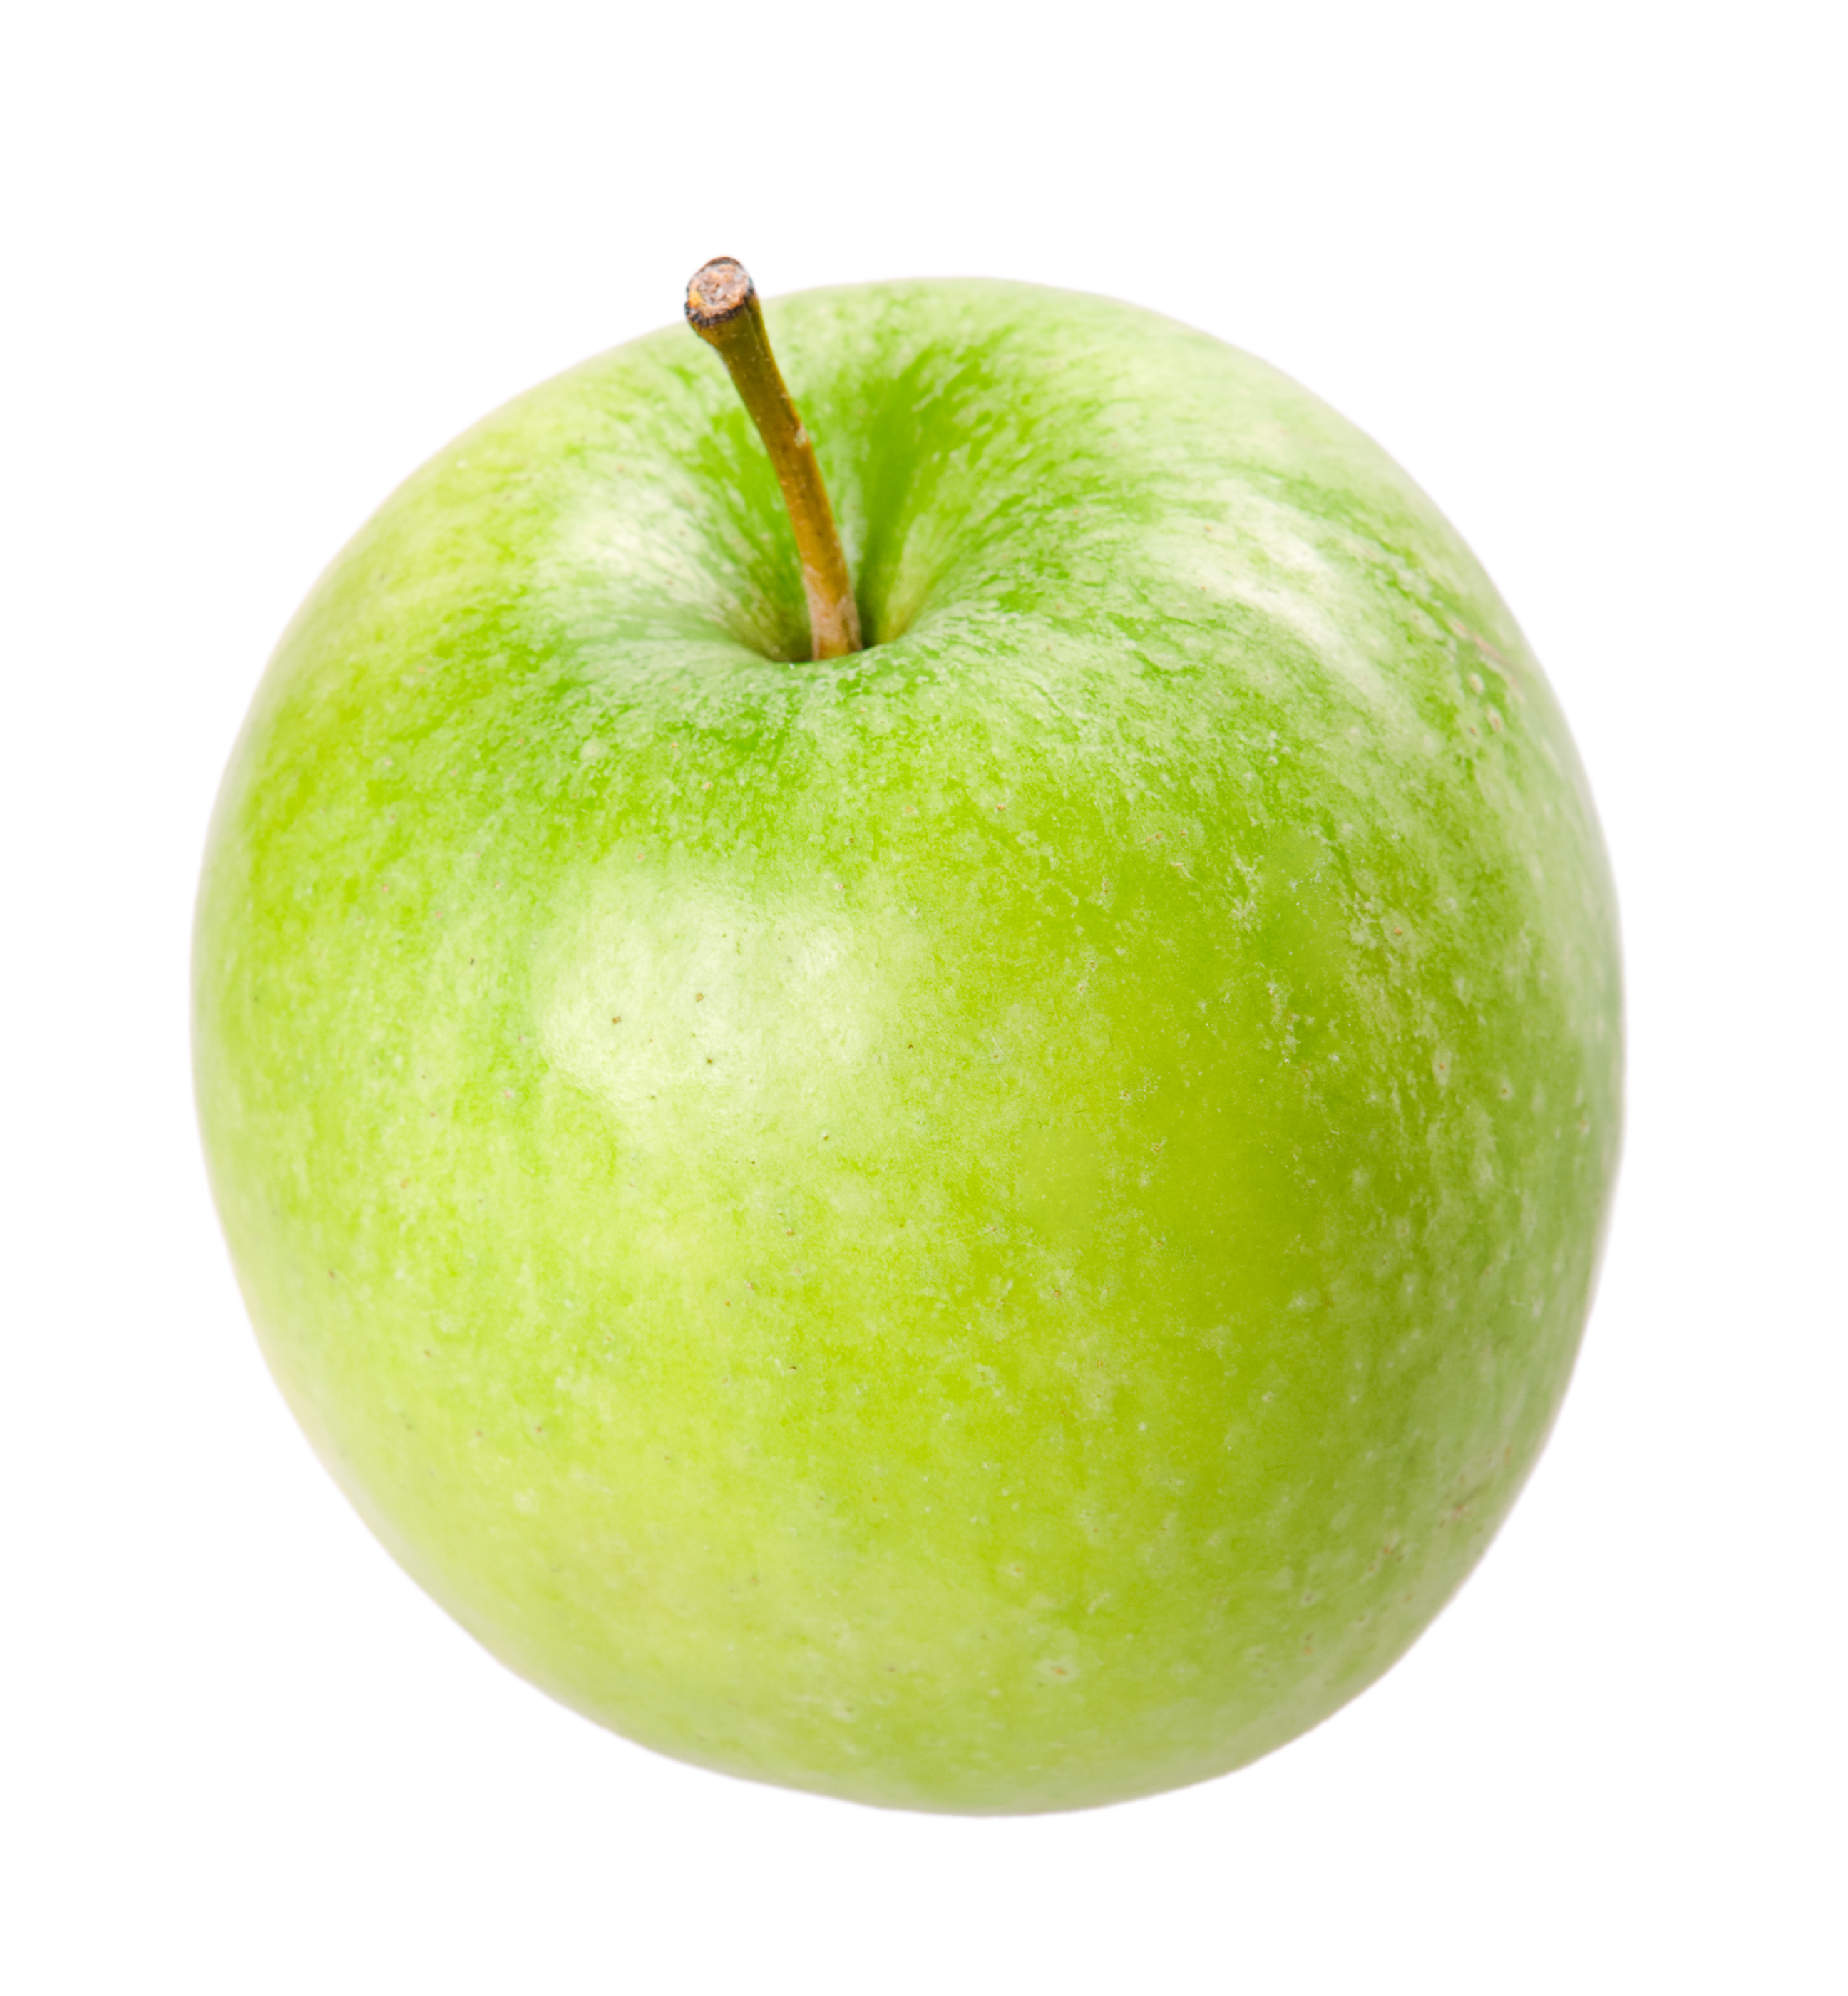 green apple, Apple, Isolated, Vegetable, Snack, HQ Photo